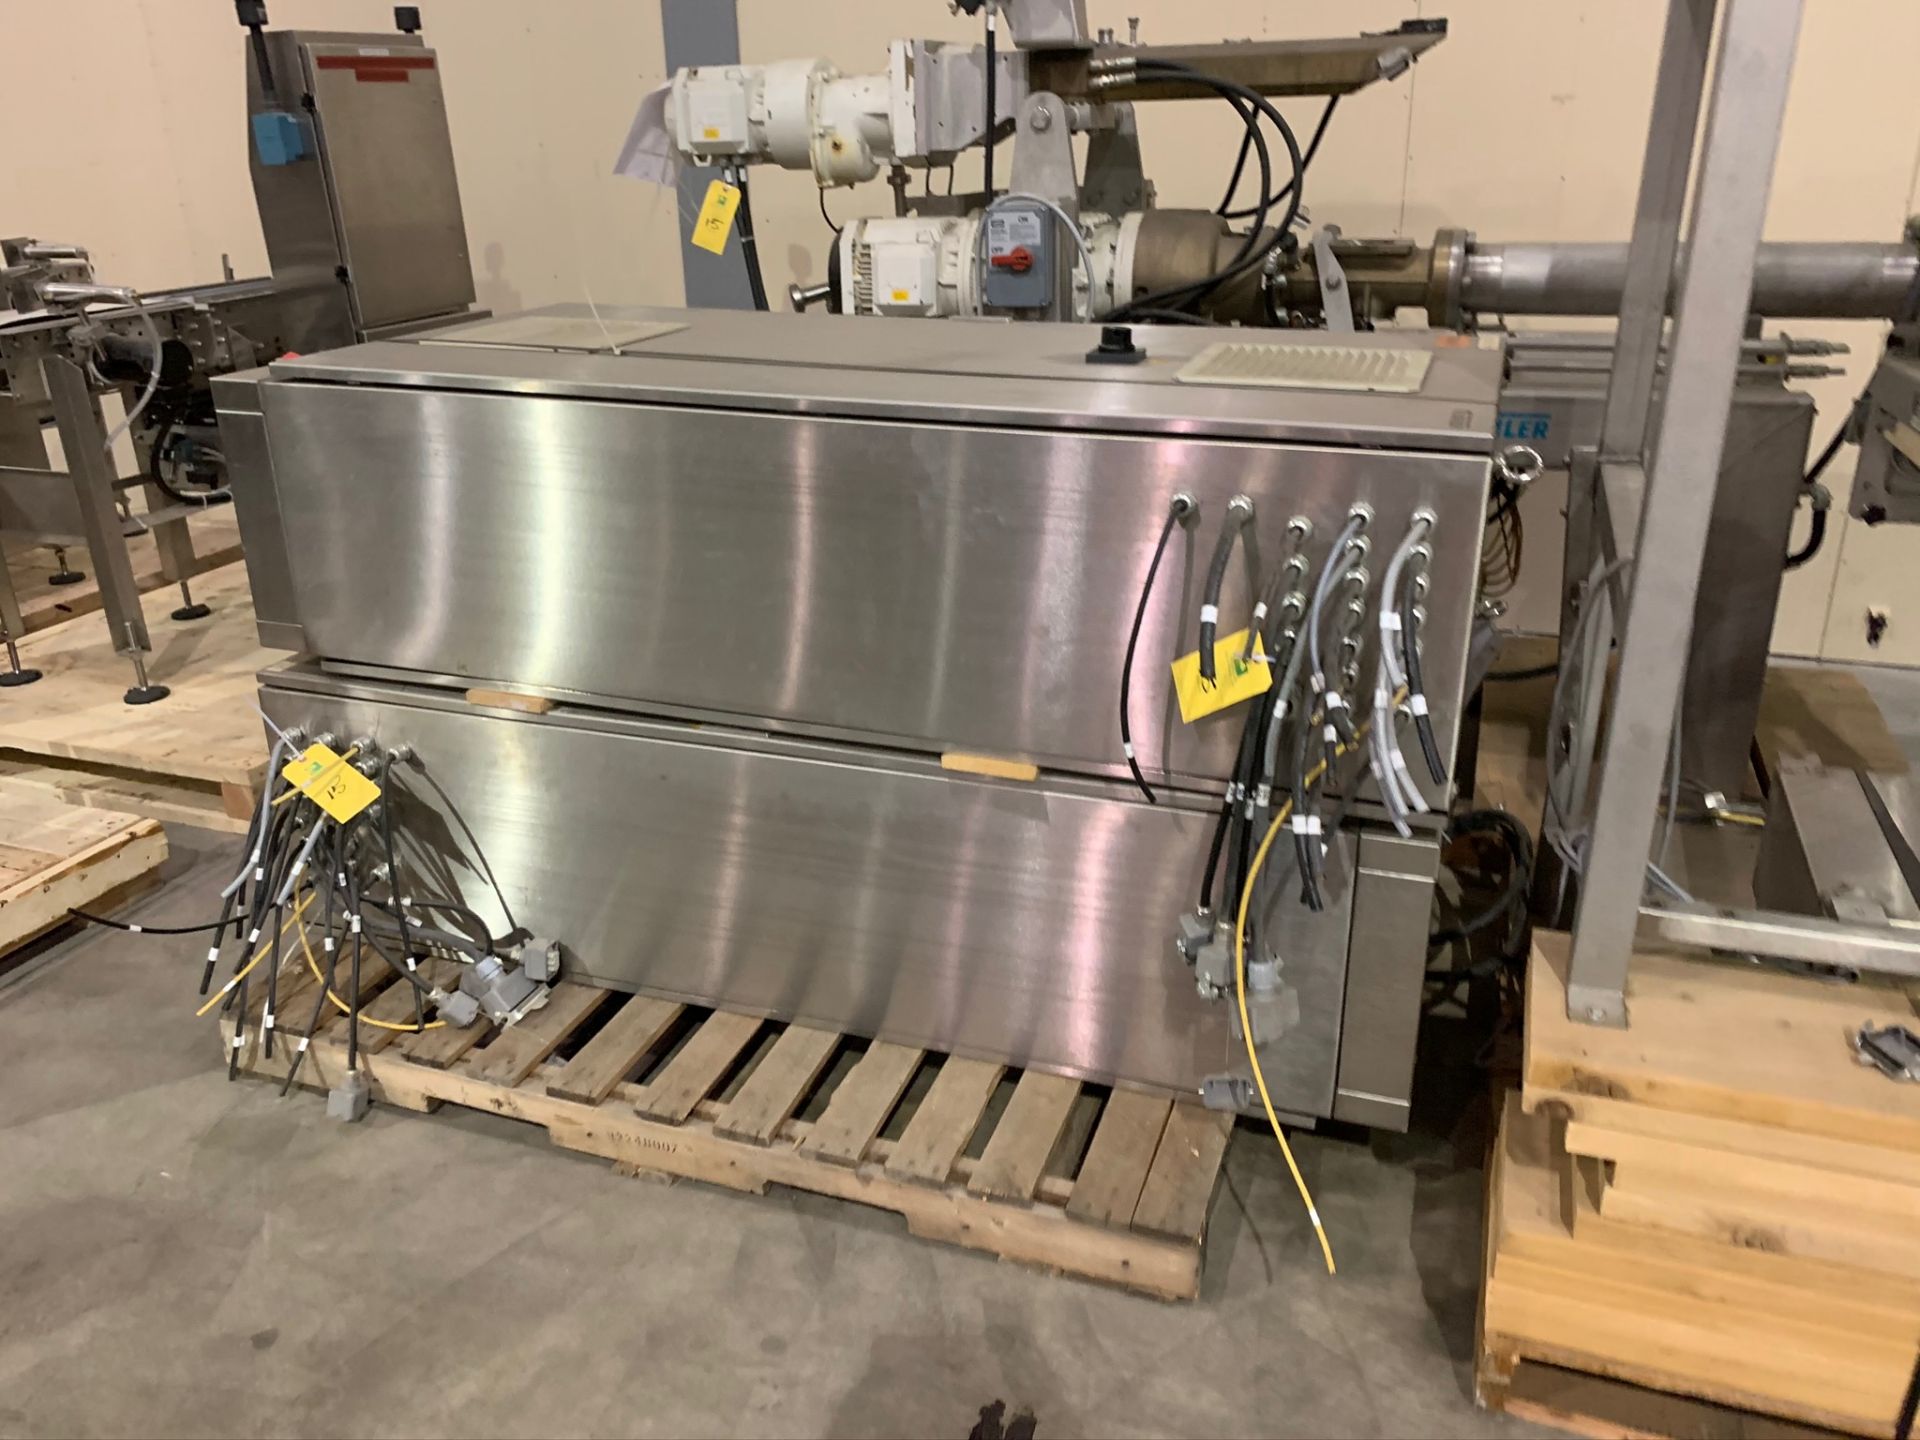 Buhler Twin Screw Extruder Model M-MN-400 S/N 10321928 with Control Panels and Auger Cart, with (Rig - Image 8 of 9